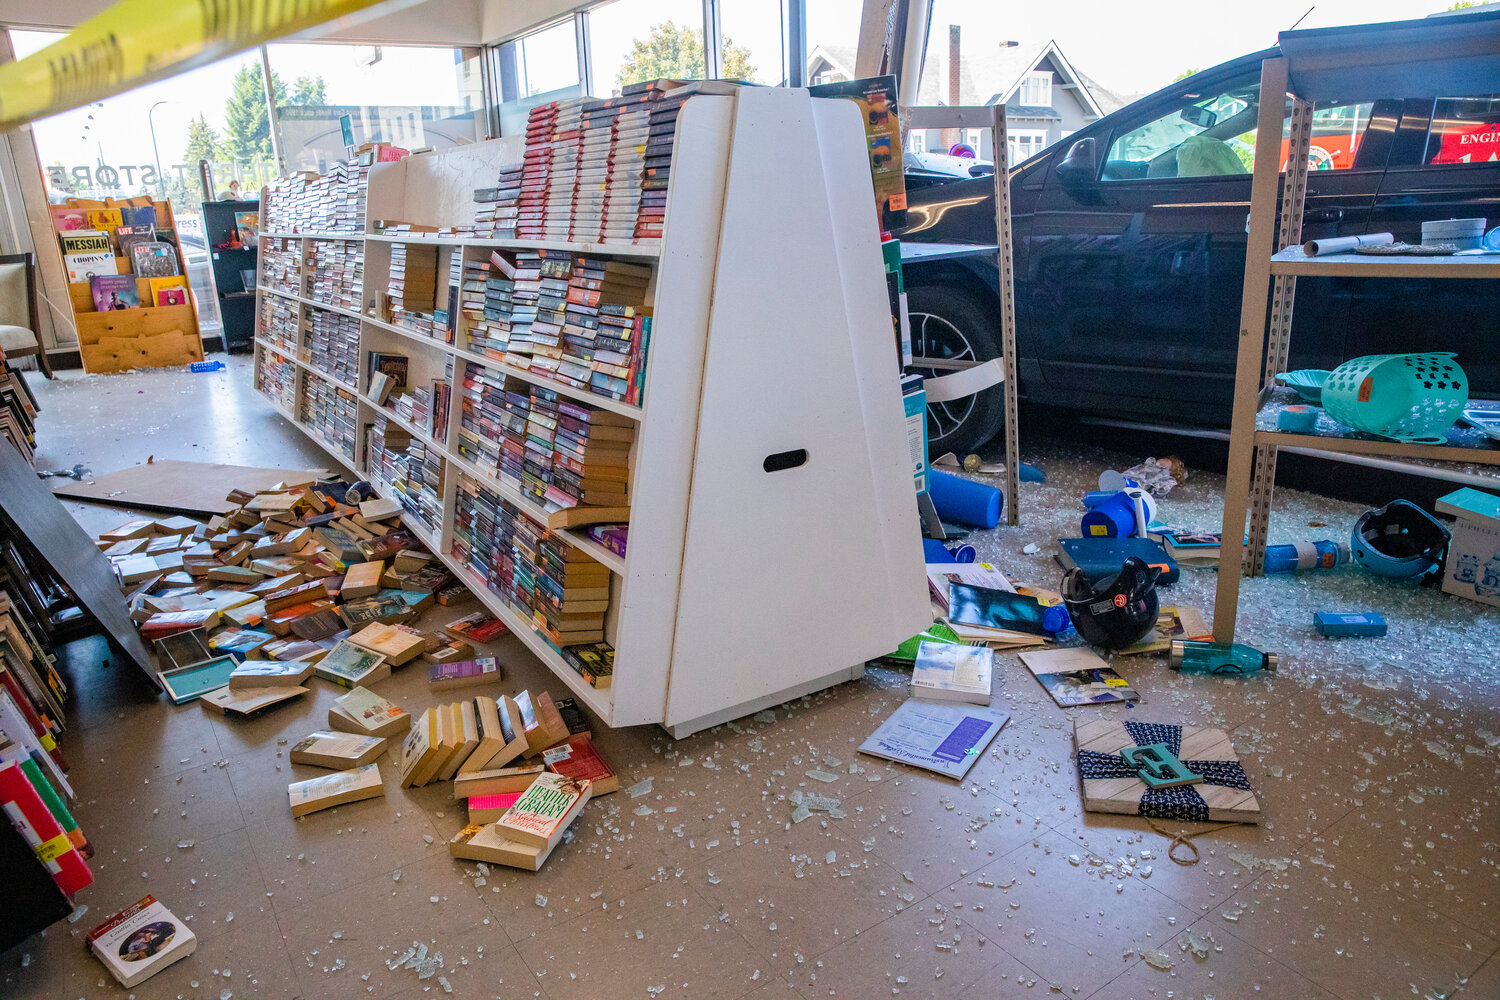 Glass is seen shattered at Visiting Nurses in Centralia after a vehicle crashed through windows, destroying shelves full of items, at the location Thursday morning.